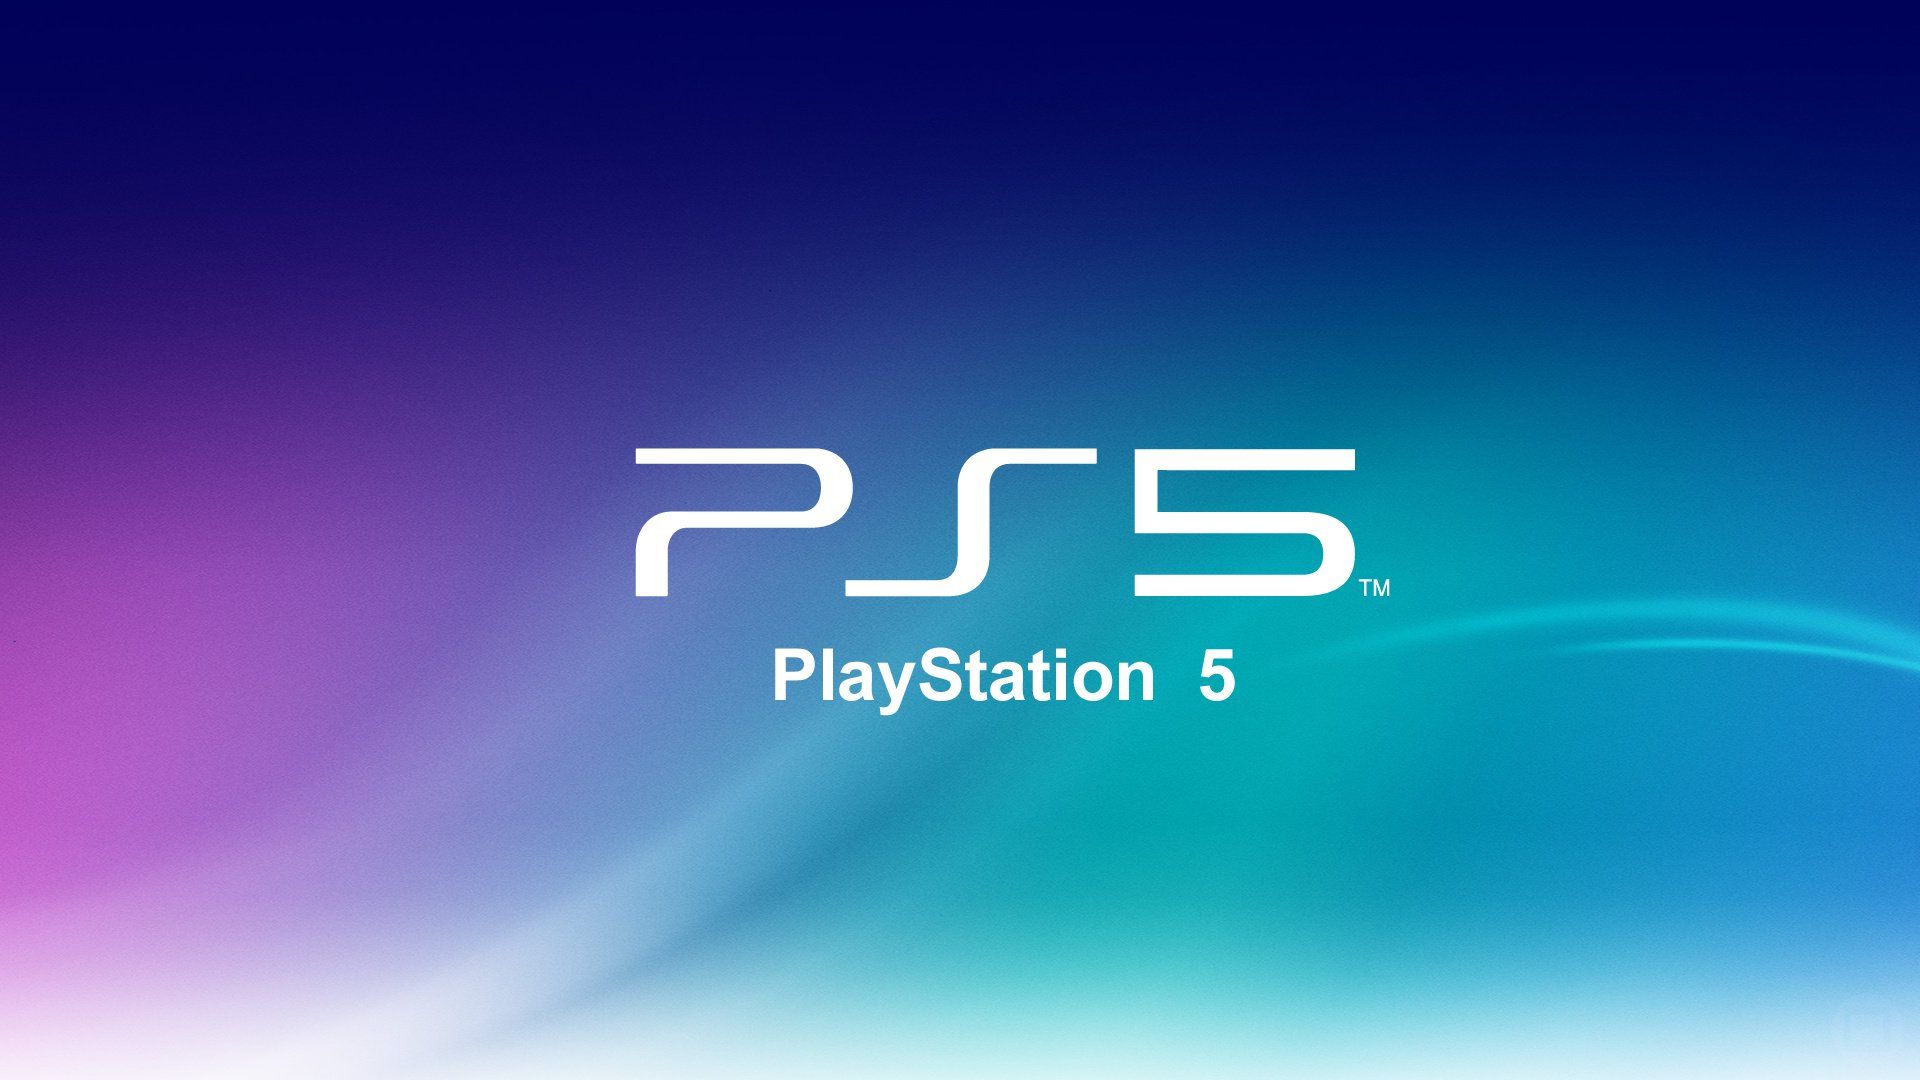 4K Footage Of PS5 Games Will Follow 1080p, 30 Frames Per Second